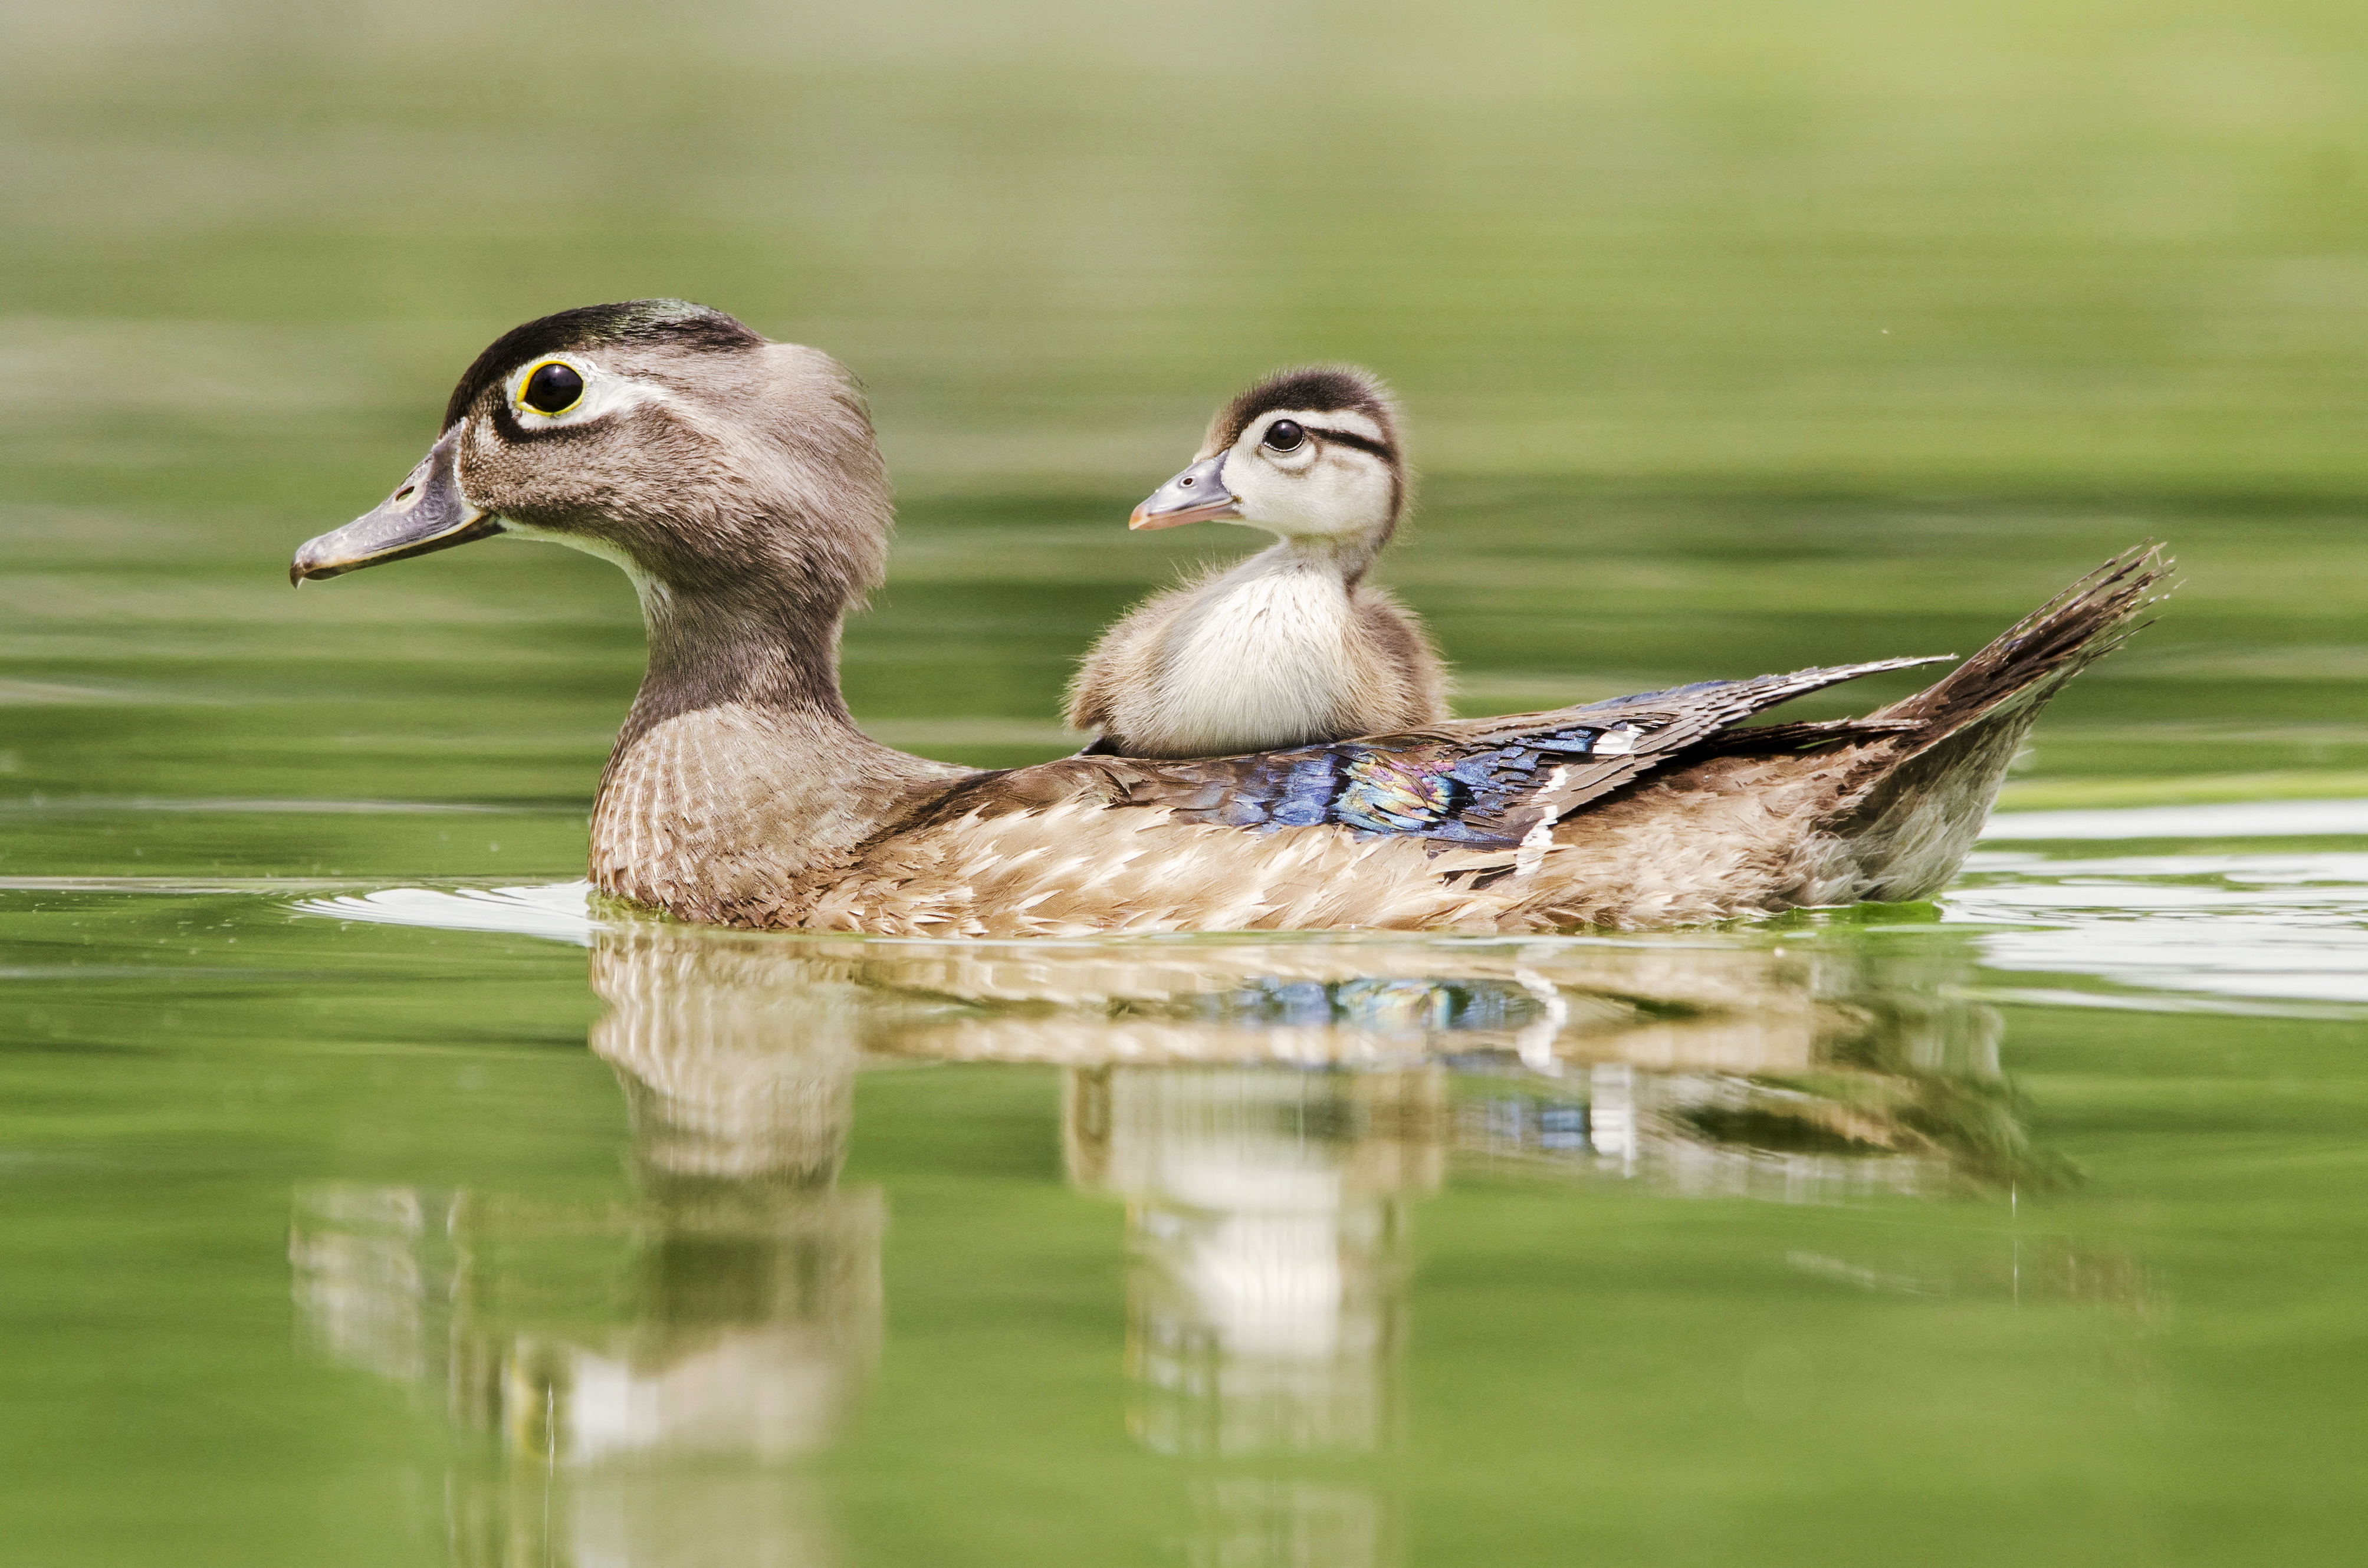 A Wood Duck chick rides on its mothers back as the mother duck swims across a calm surface.